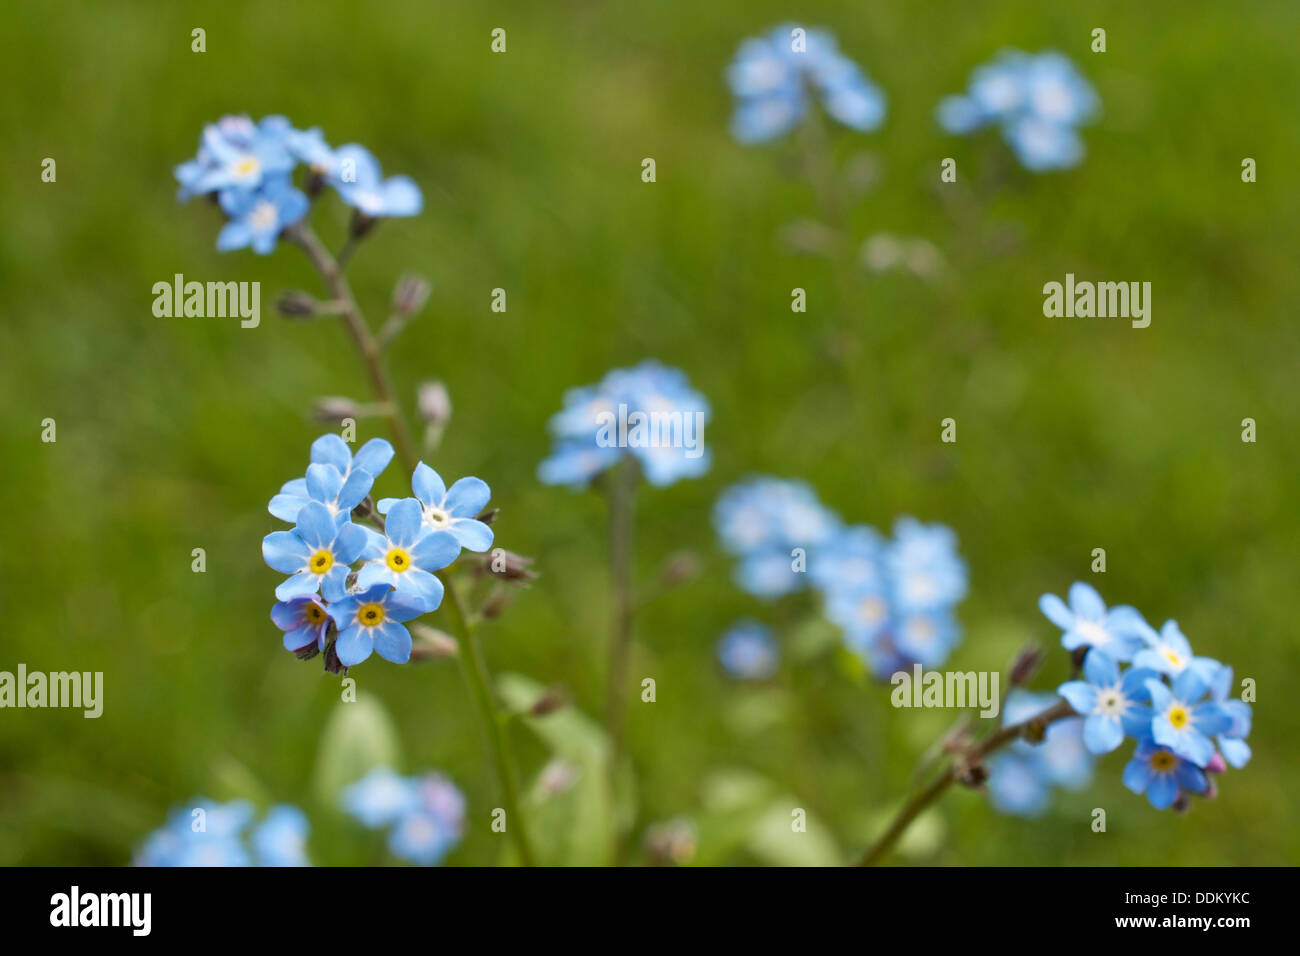 Blue Forget-me-Not flowers against a green grass background. Stock Photo